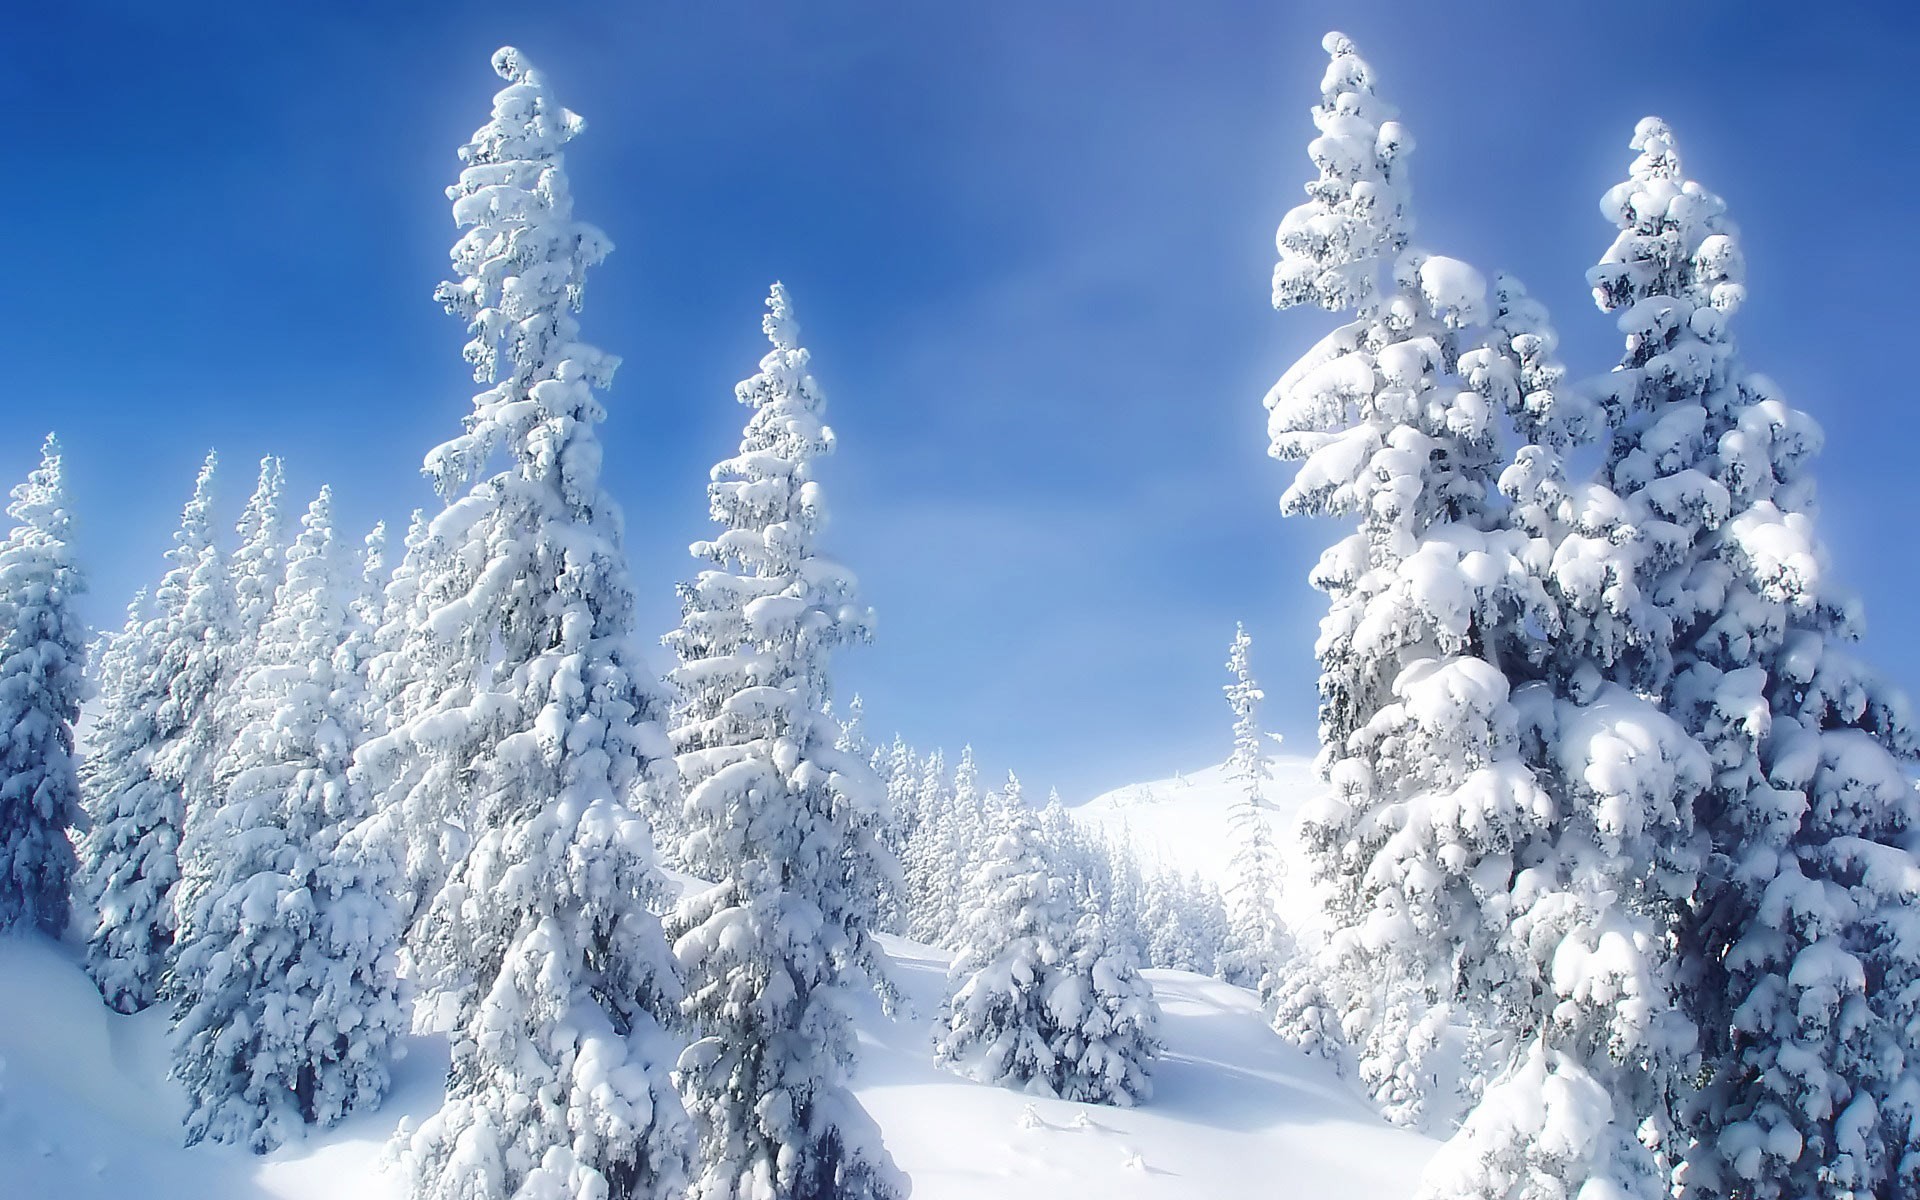 Snow theme background images